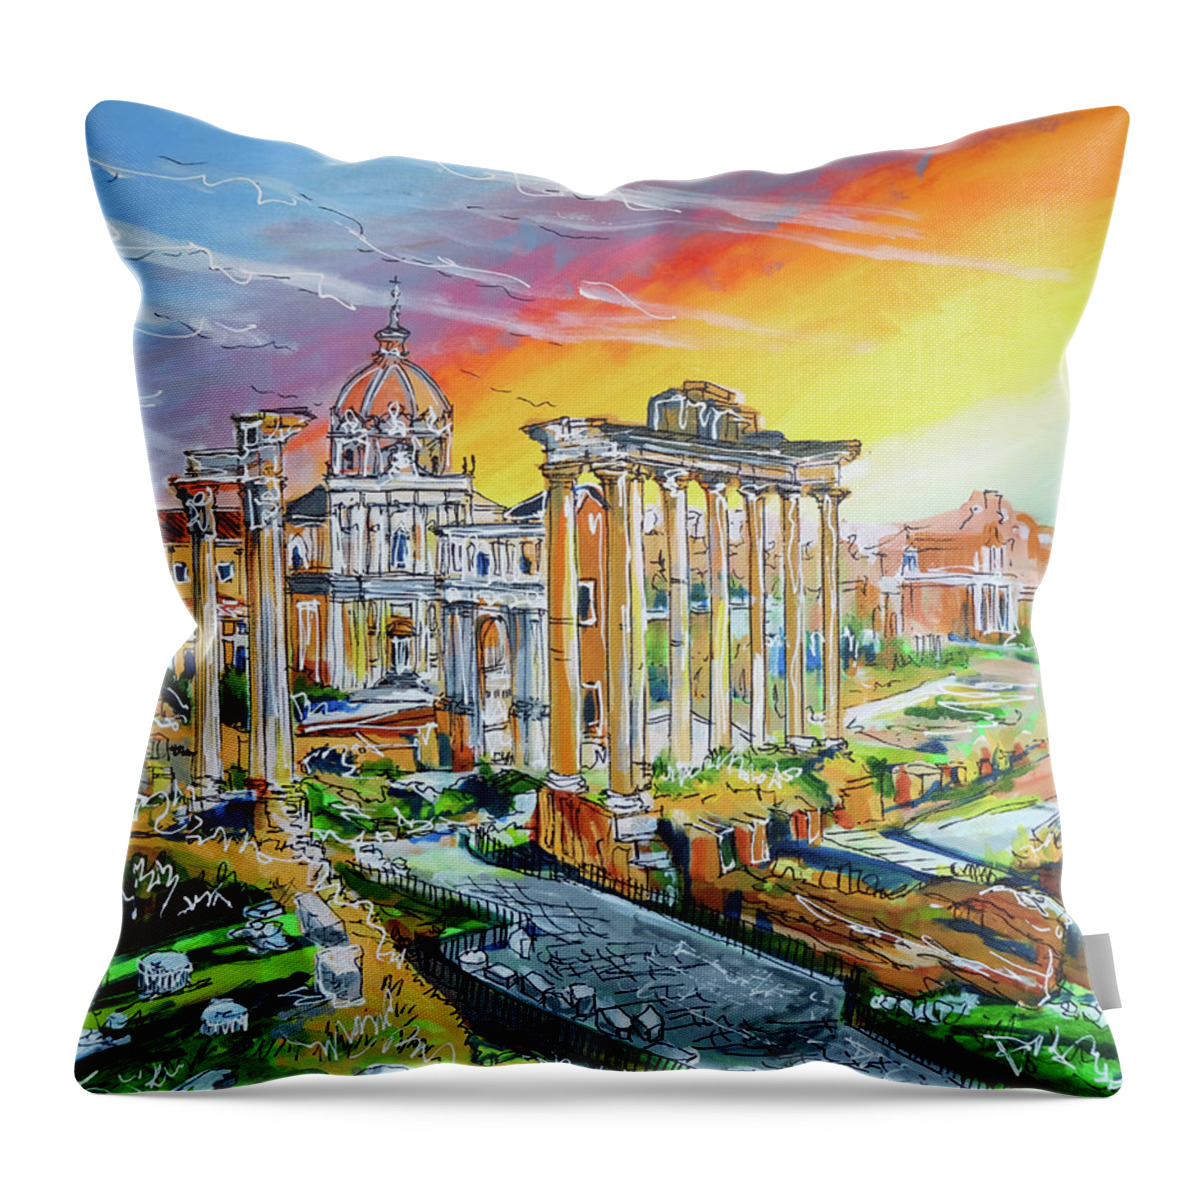 Roman Forum Throw Pillow featuring the painting Roman Forum by Laura Hol Art